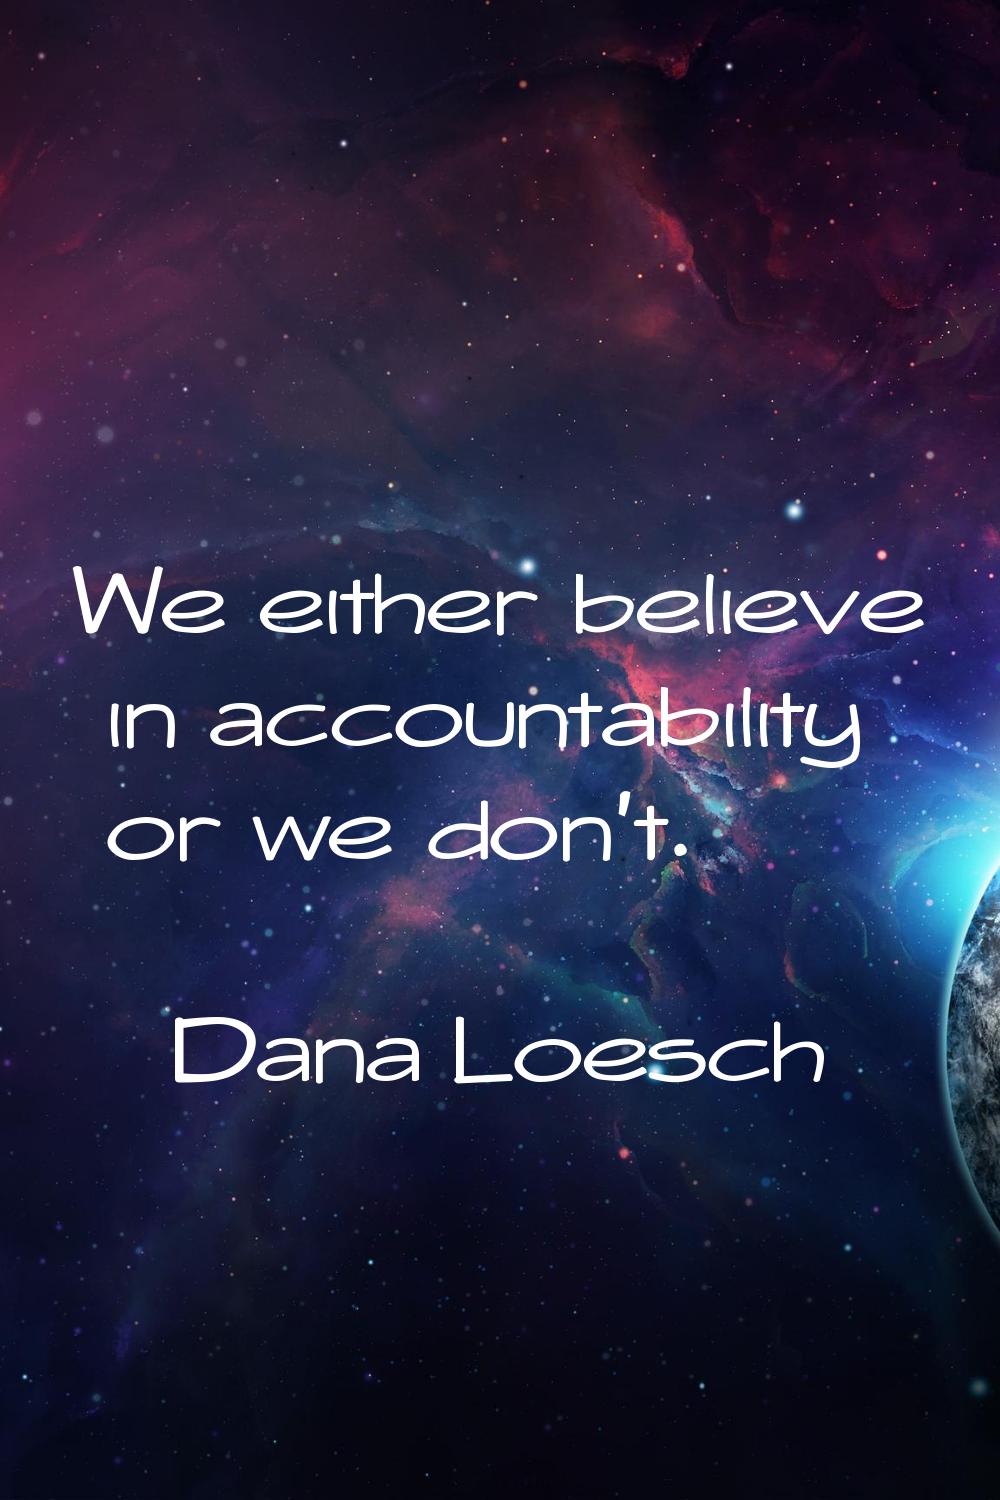 We either believe in accountability or we don't.